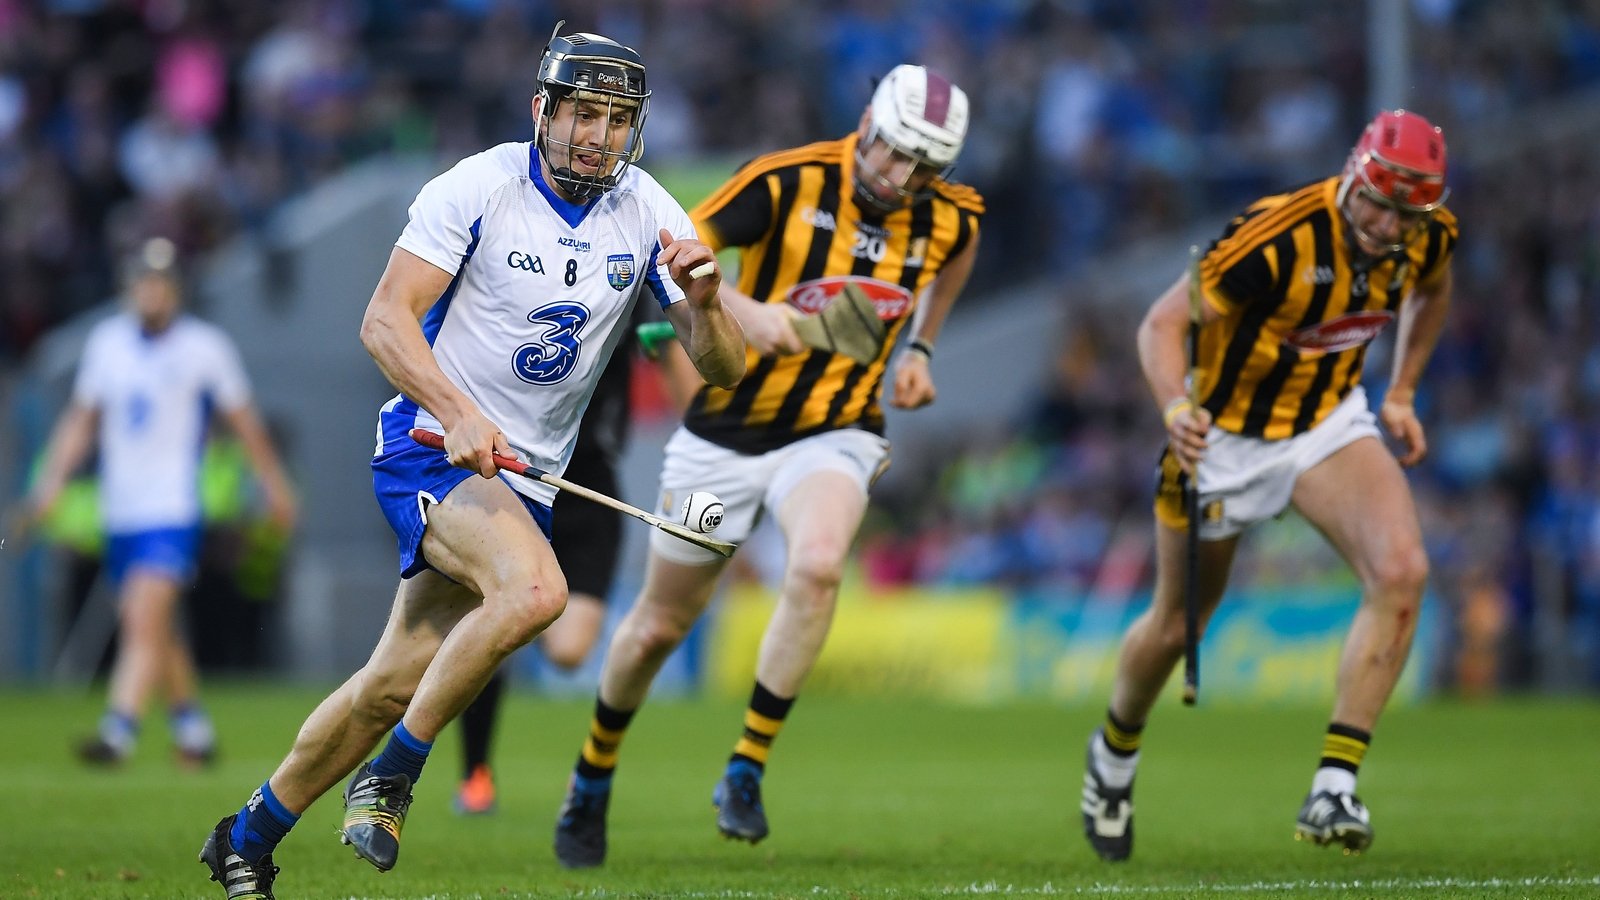 History no longer connects Waterford to the Kilkenny floor

